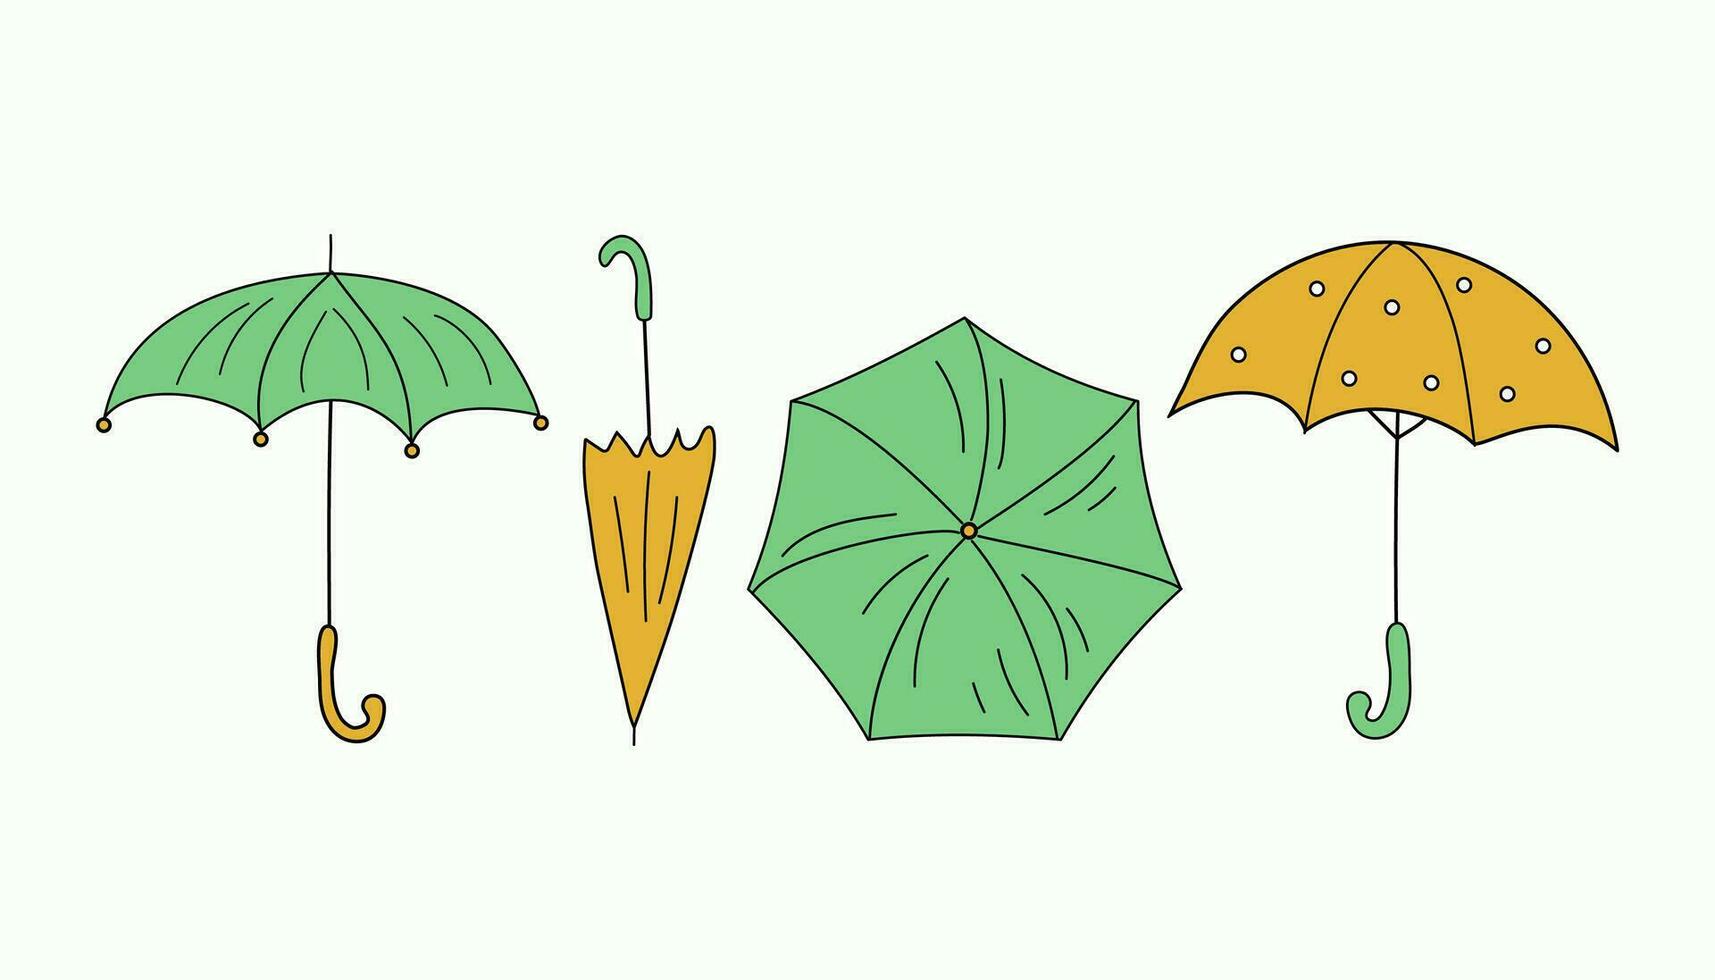 Set of umbrellas in doodle style. Brightly colored open and closed umbrellas. Drawings. Vector illustration on white background with set of icons.